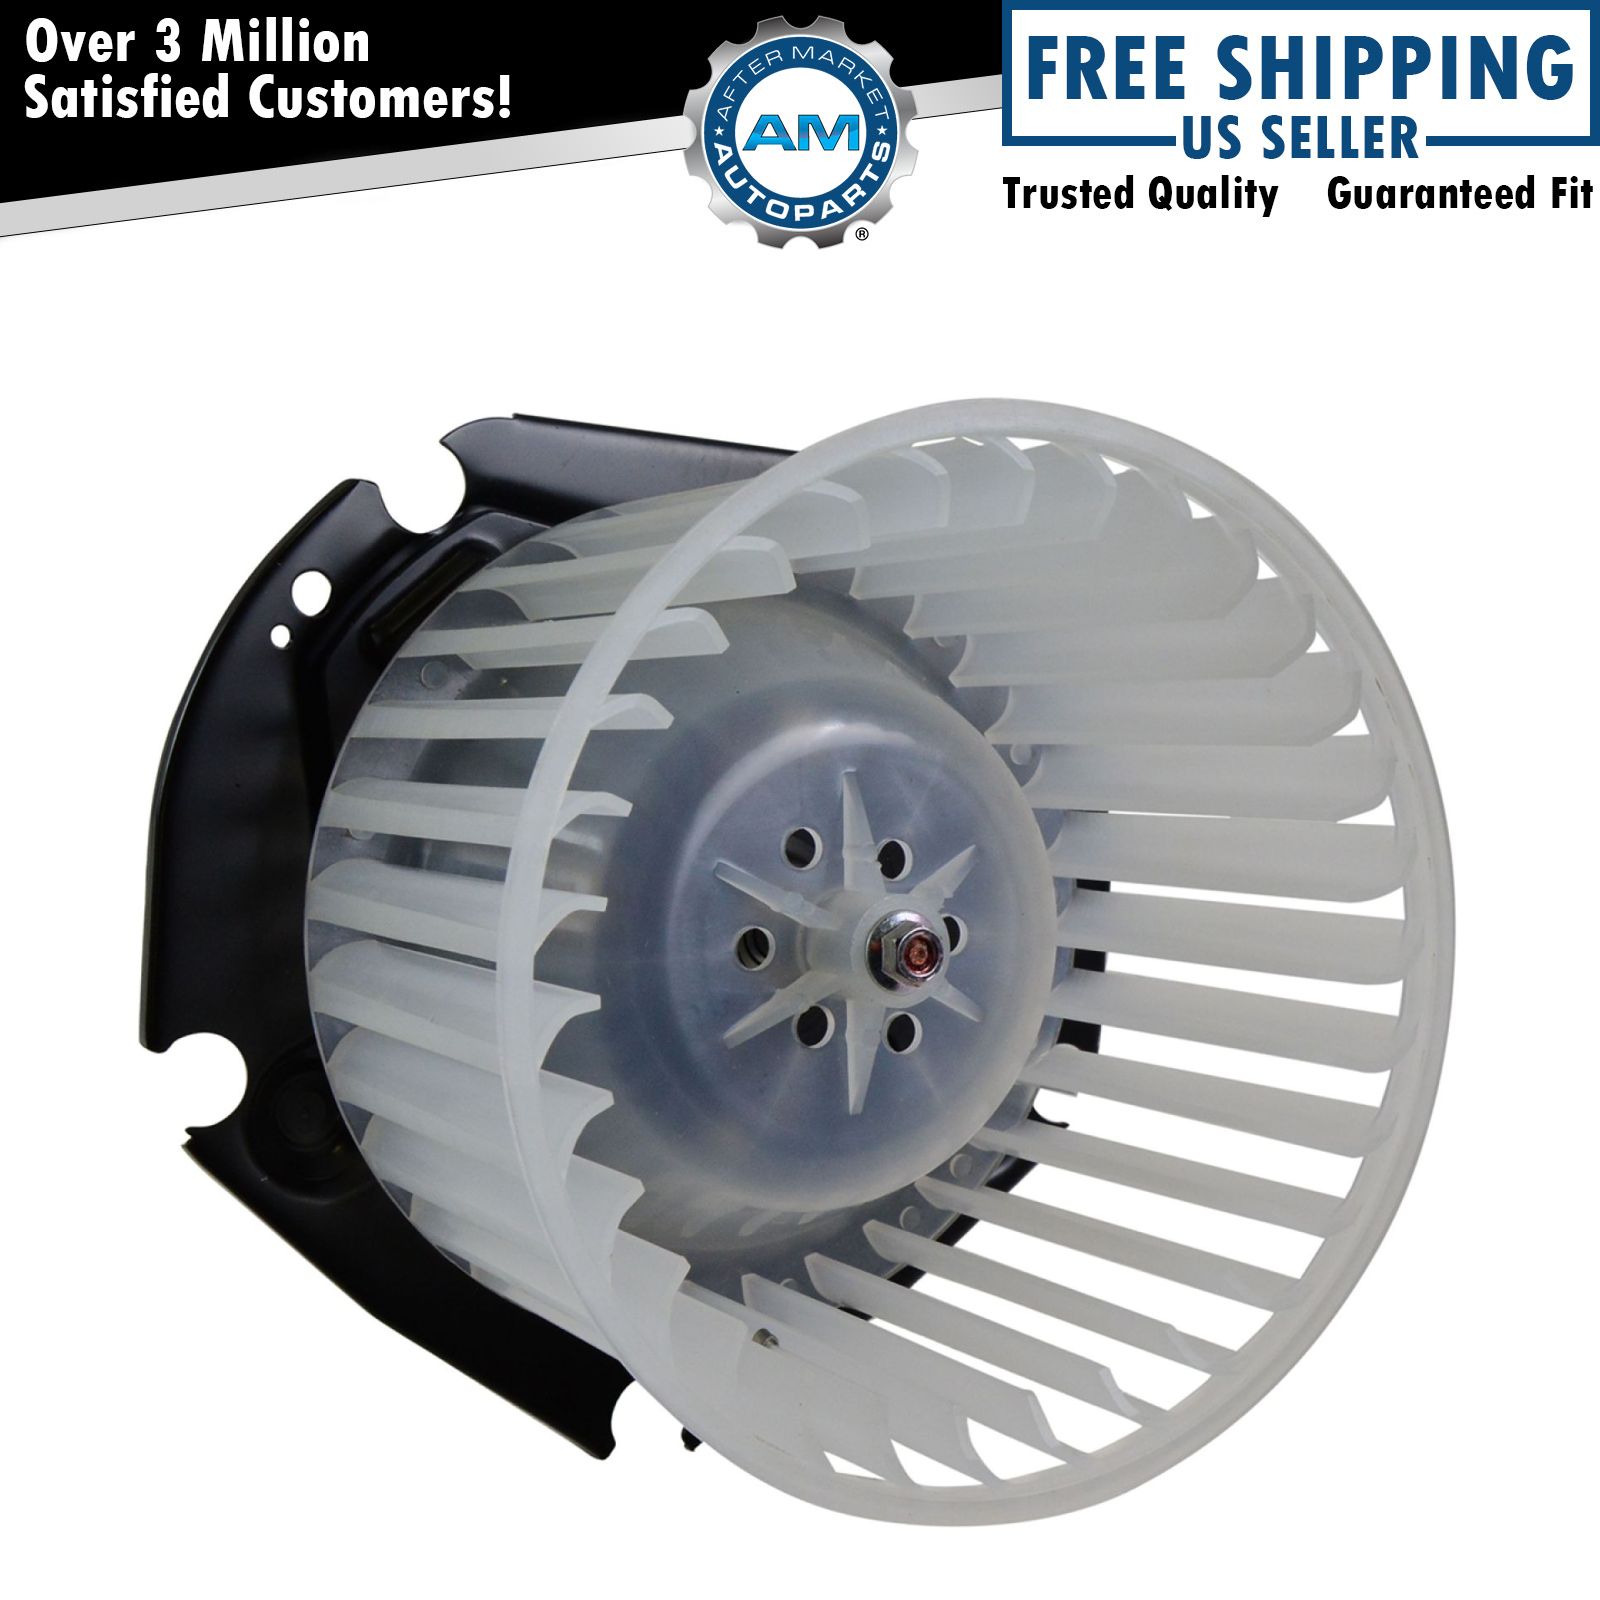 A/C Heater Blower Motor w/ Fan Cage for Pontiac Buick Cadillac Olds